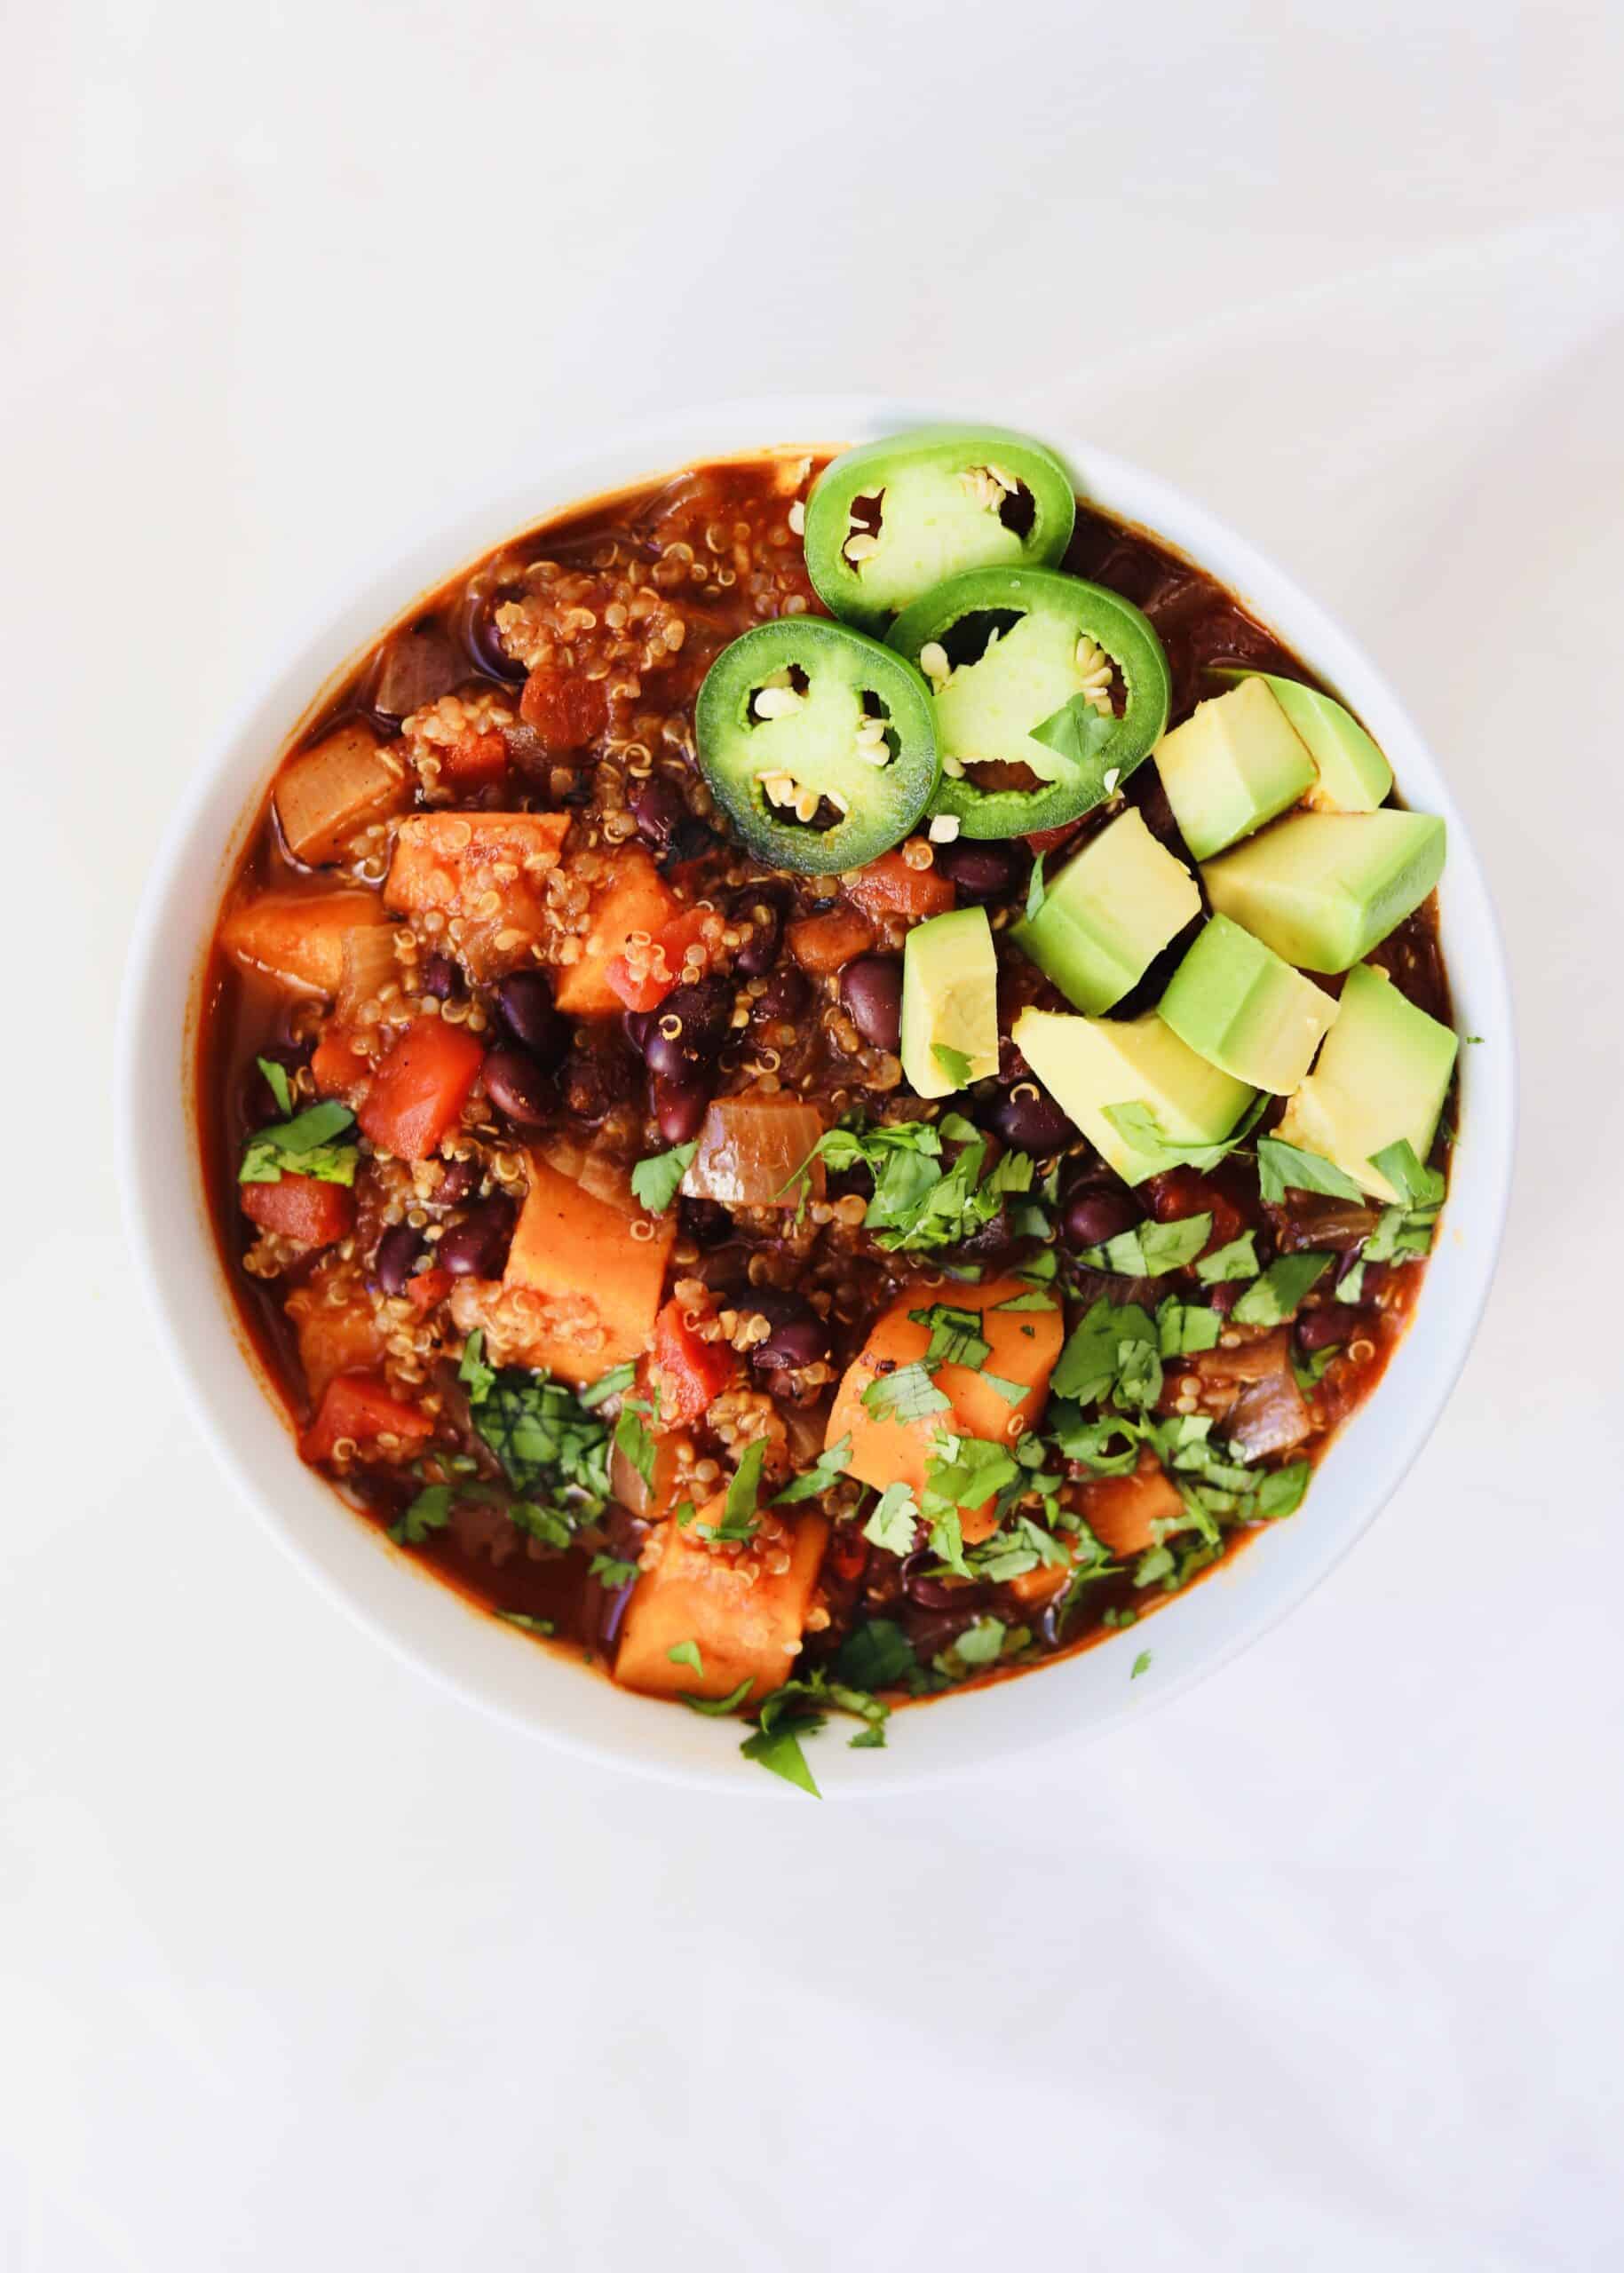 Sweet Potato Black Bean Chili is an easy vegetarian and vegan chili for your busy weeknights. It all comes together in one pot. Healthy and packed with flavor for Meatless Monday.